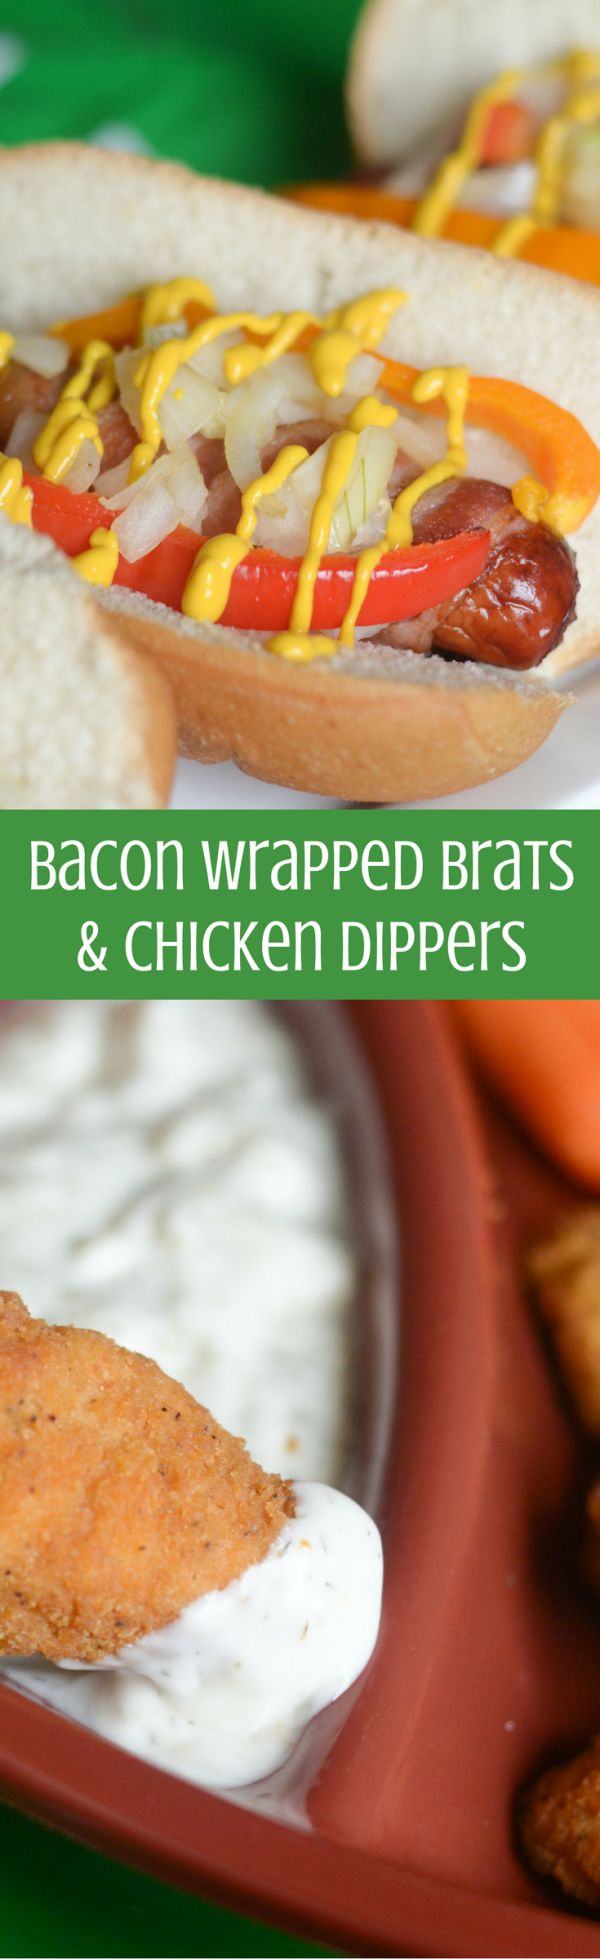 Bacon Wrapped Brats & Chicken Dippers